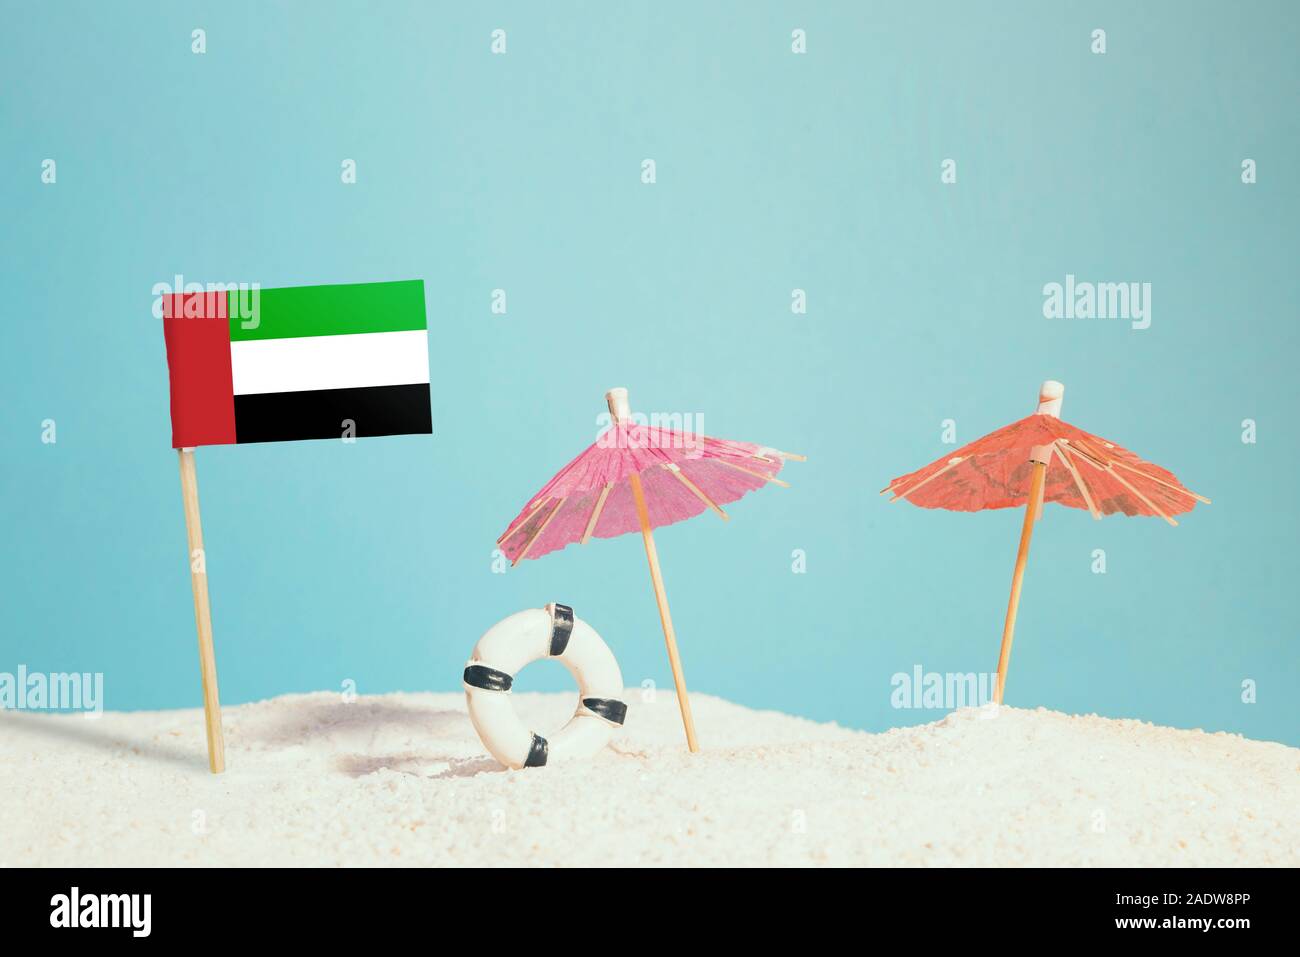 Miniature flag of United Arab Emirates on beach with colorful umbrellas and life preserver. Travel concept, summer theme. Stock Photo